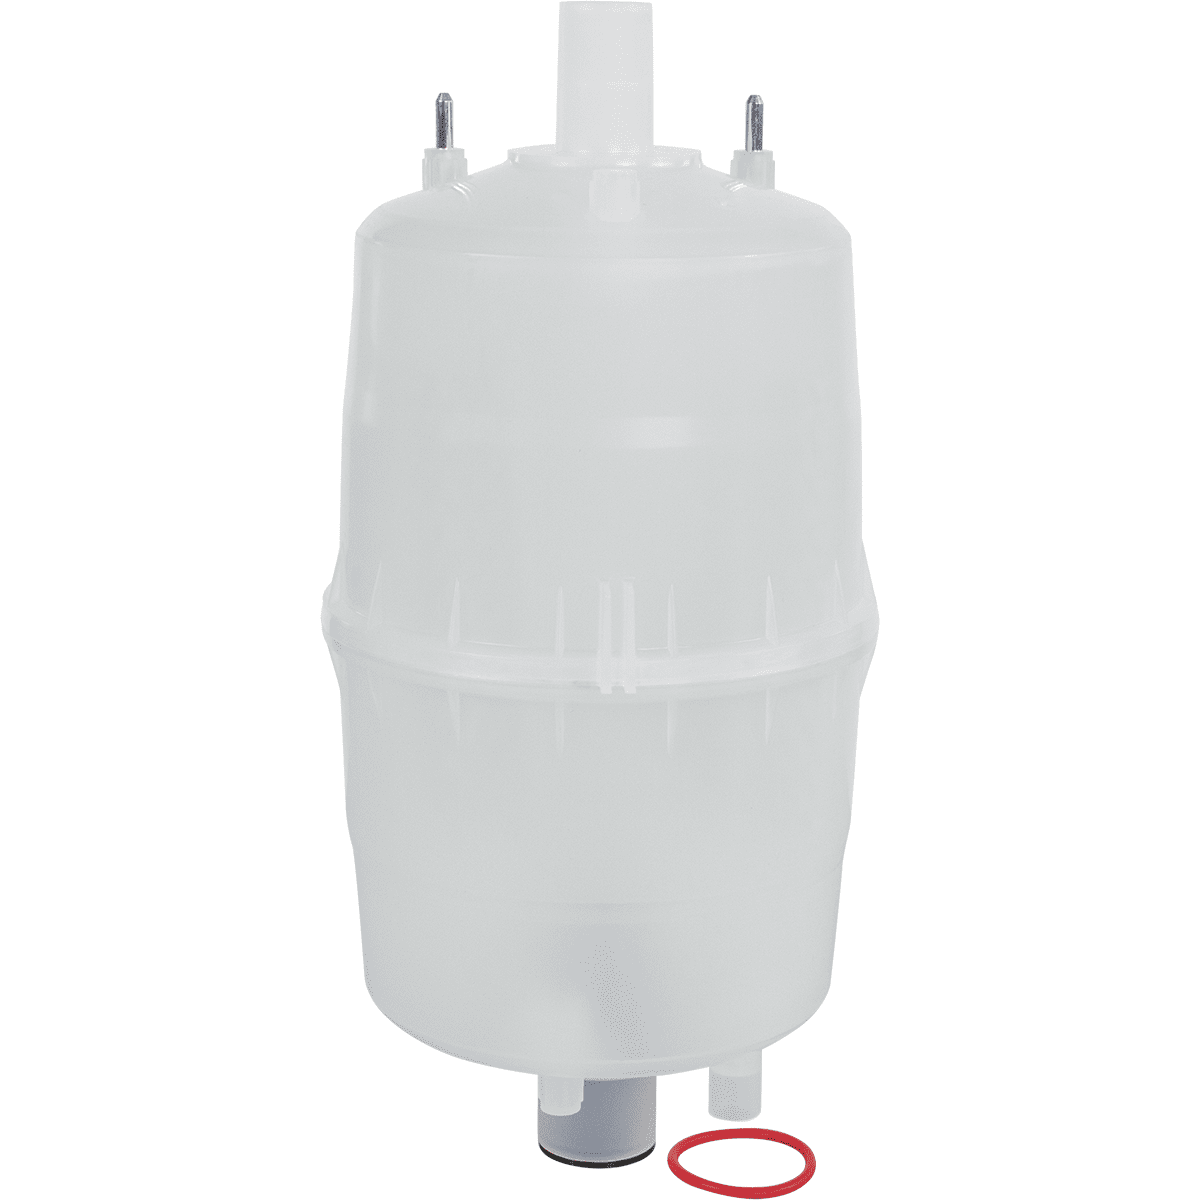 Aprilaire 80 Steam Canister for Model 800 Humidifier